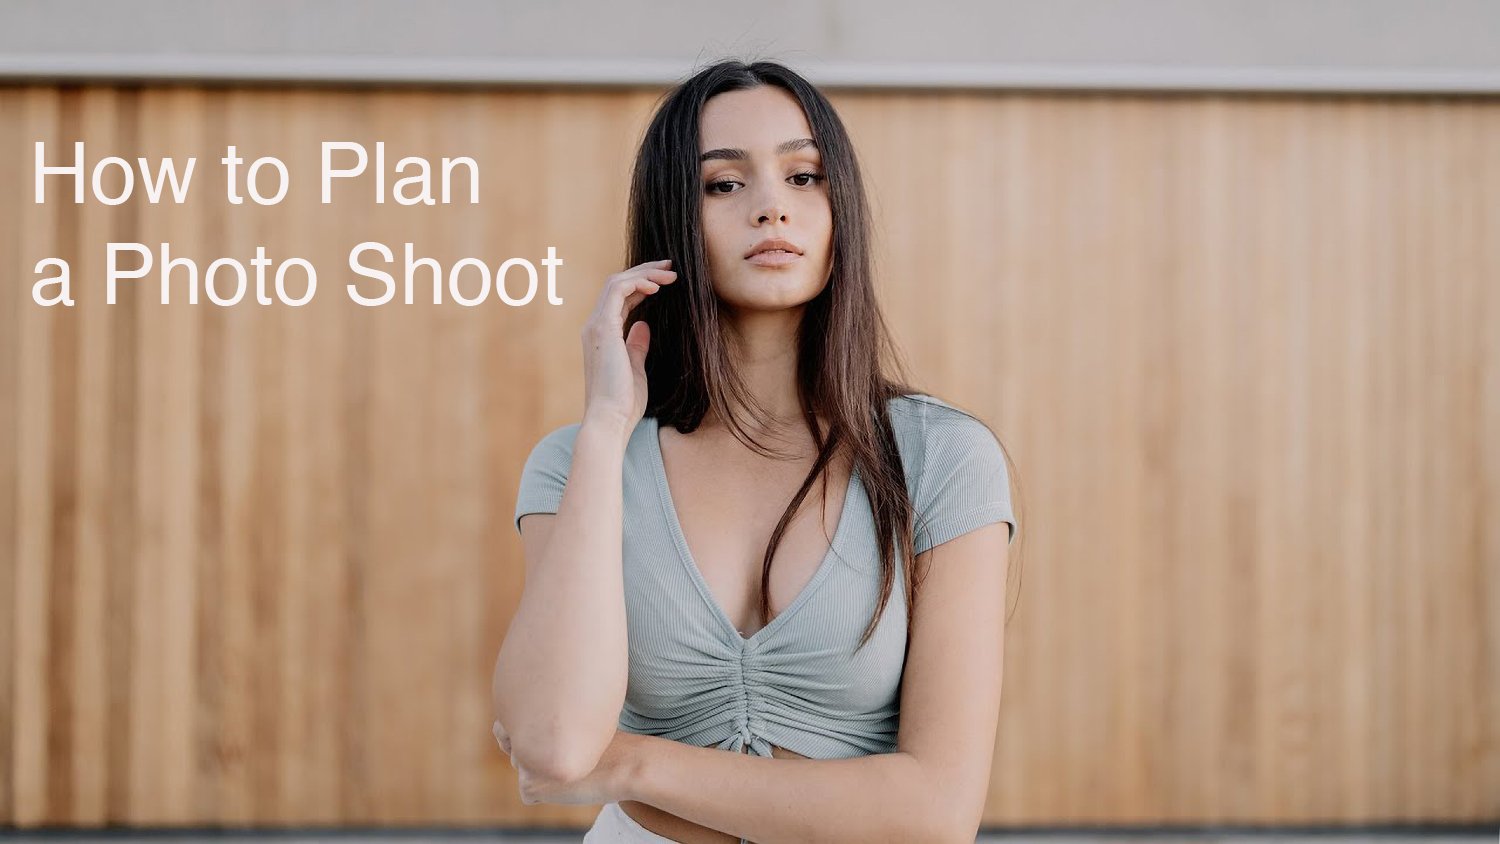 How to Plan a Portrait Photo Shoot: Tips & Tricks